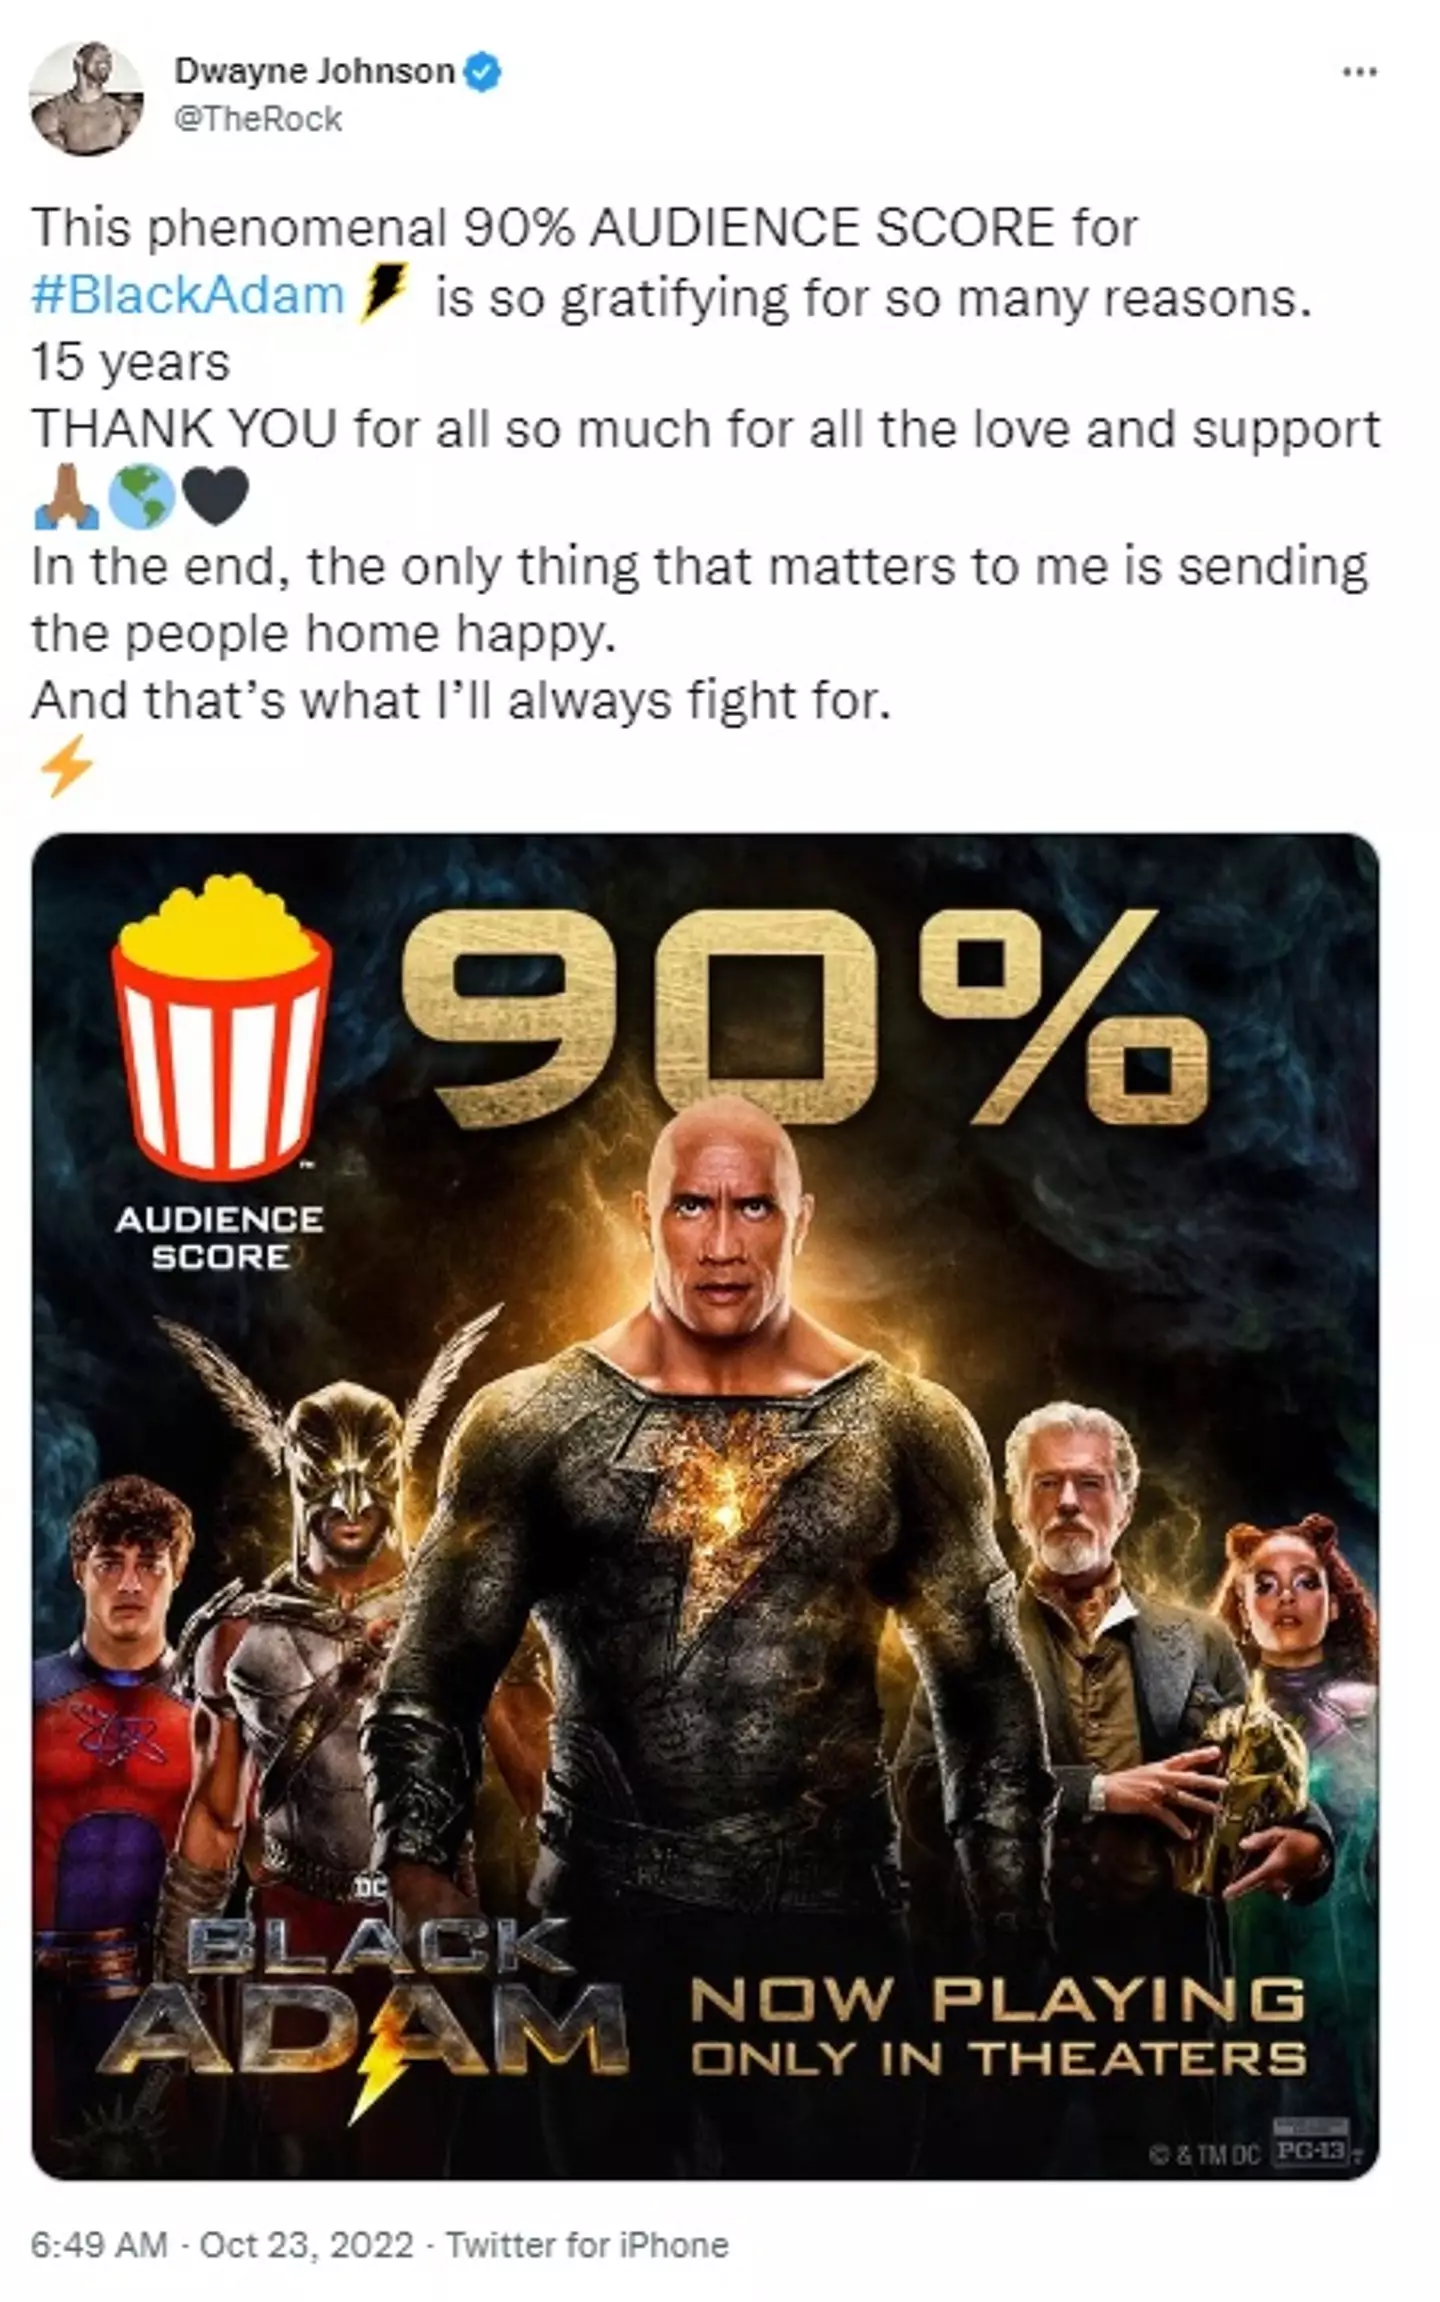 Dwayne Johnson thanked fans of the movie for enjoying it.